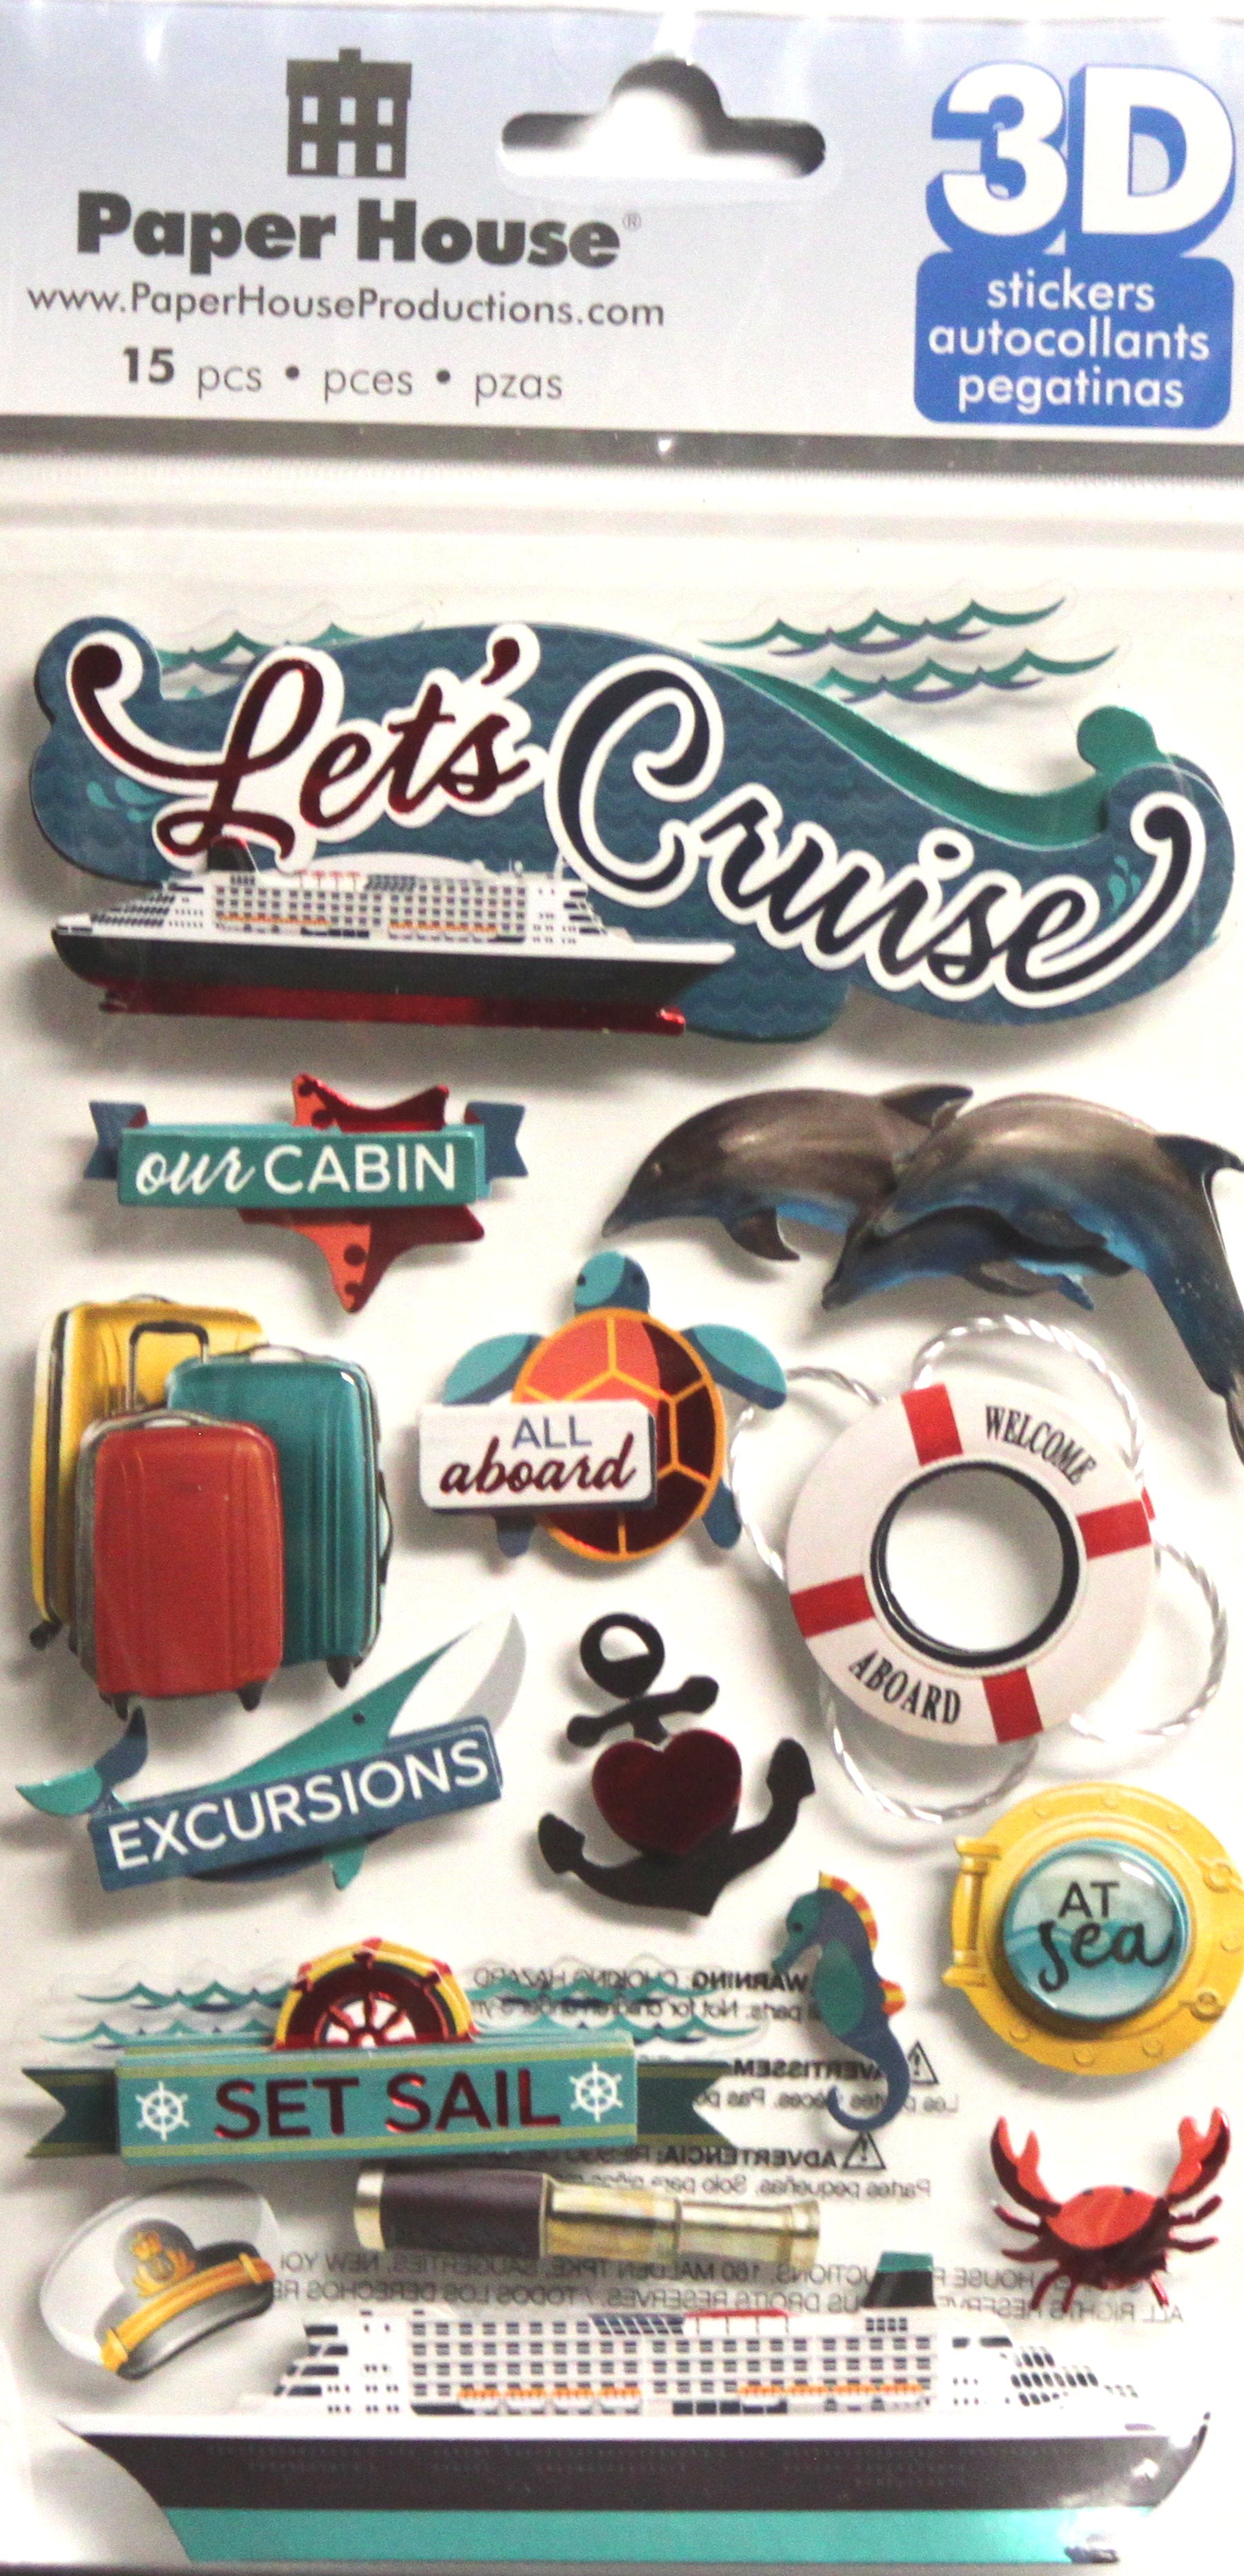 Paper House 3D Dimensional Let's Cruise Stickers